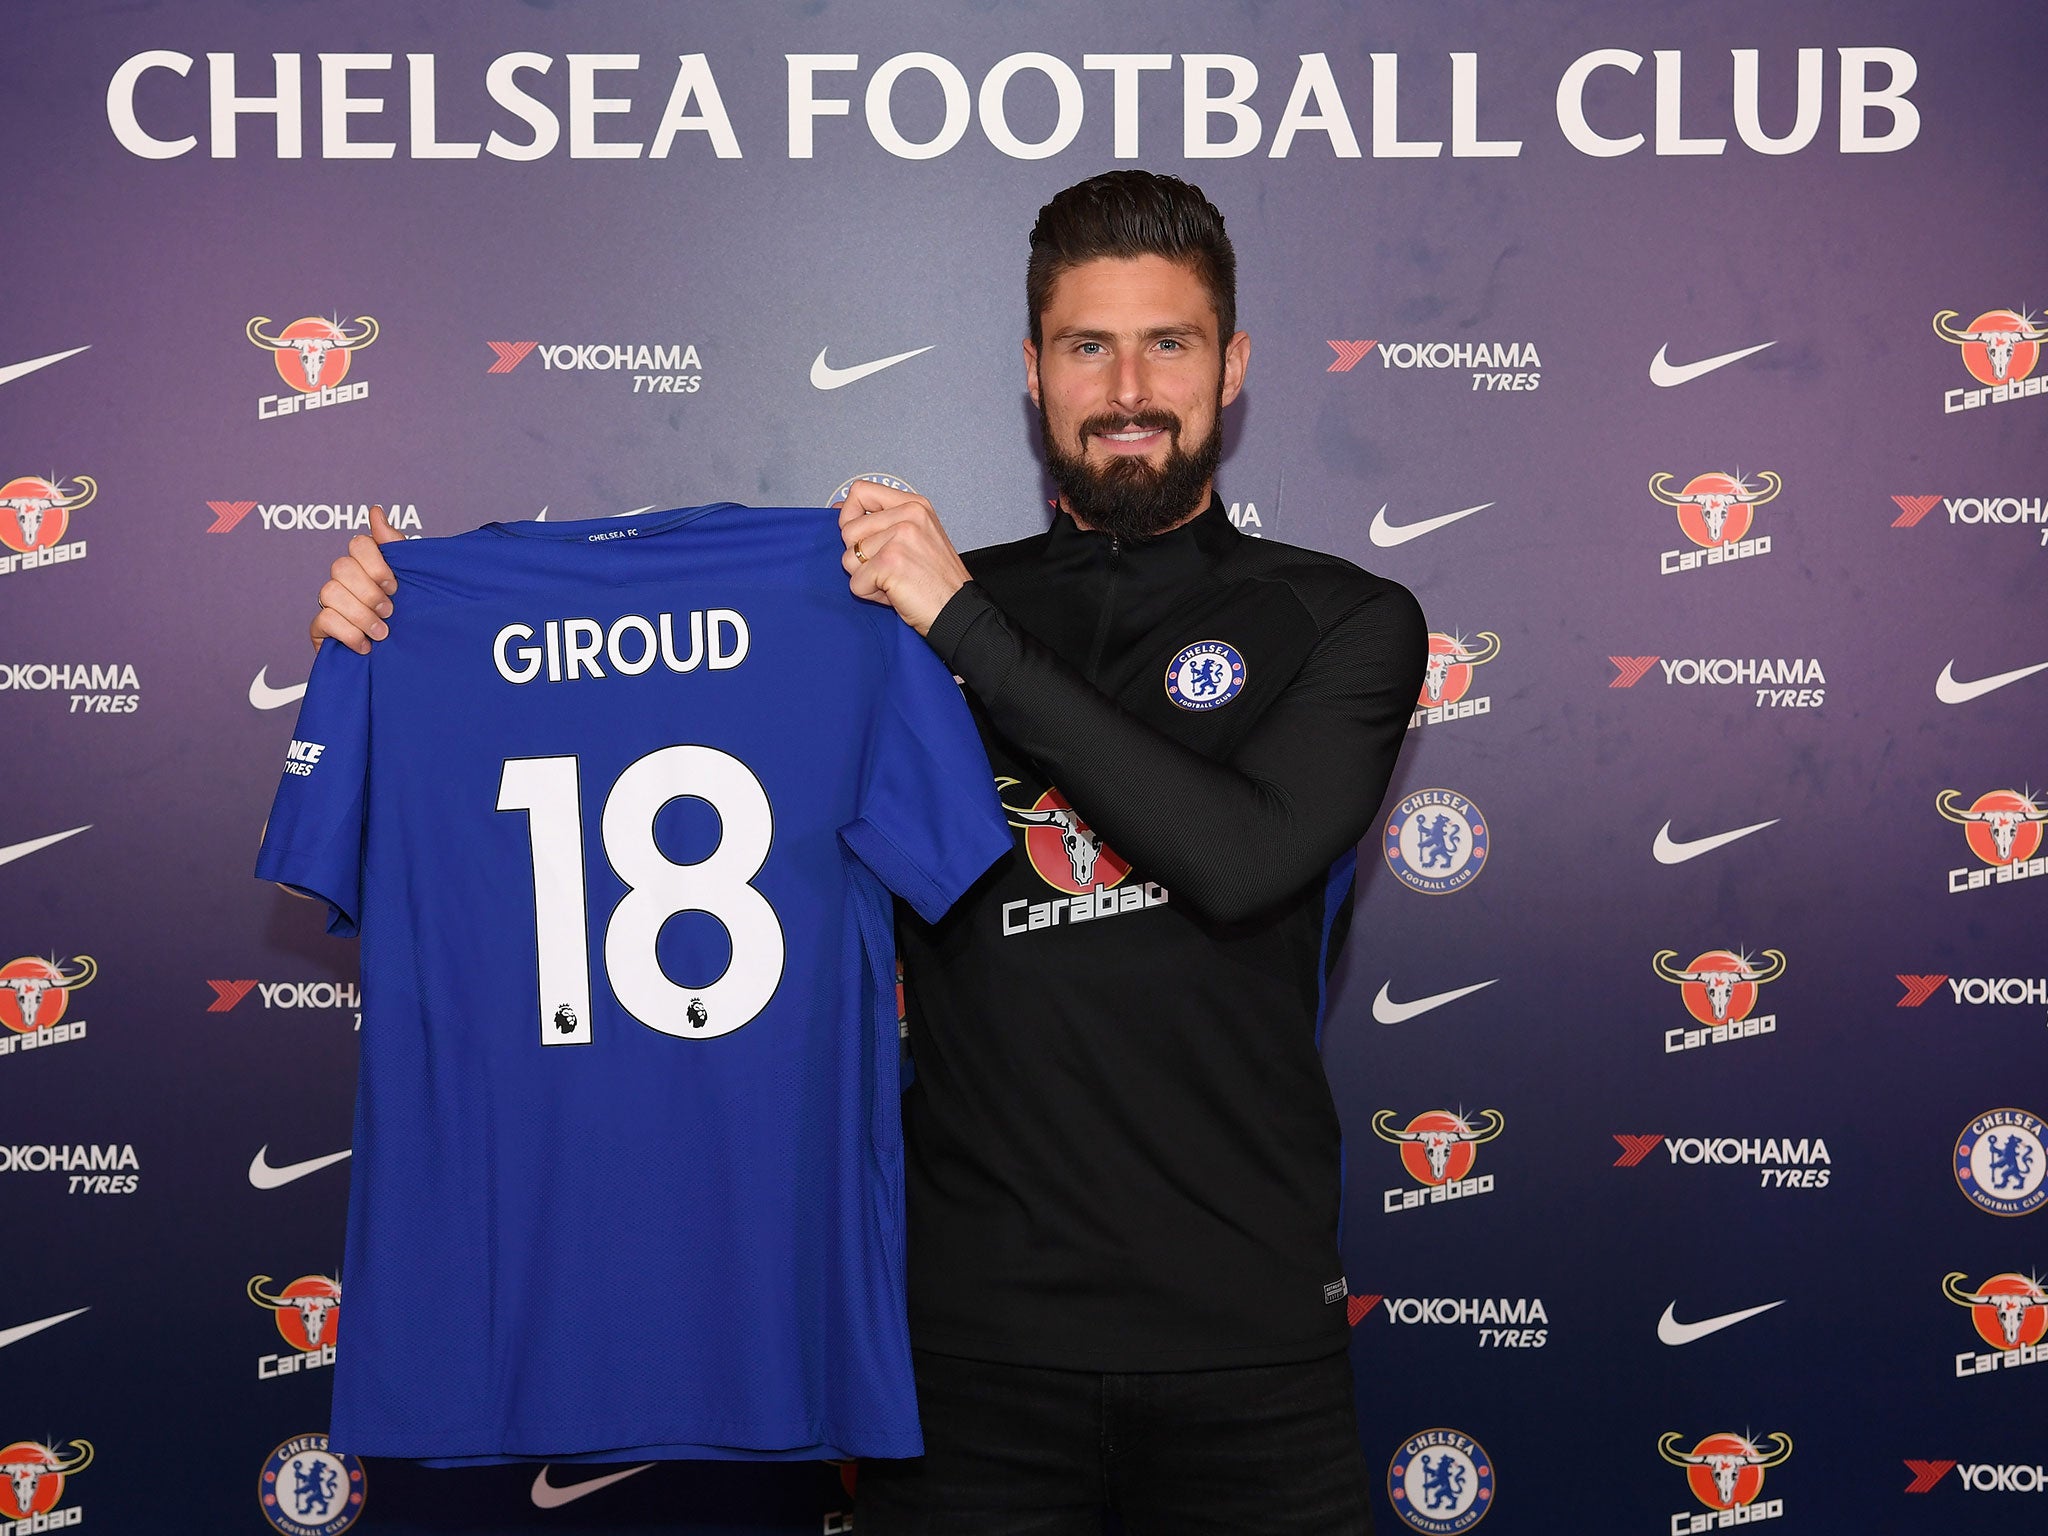 Olivier Giroud was unveiled as a Chelsea player on Wednesday afternoon